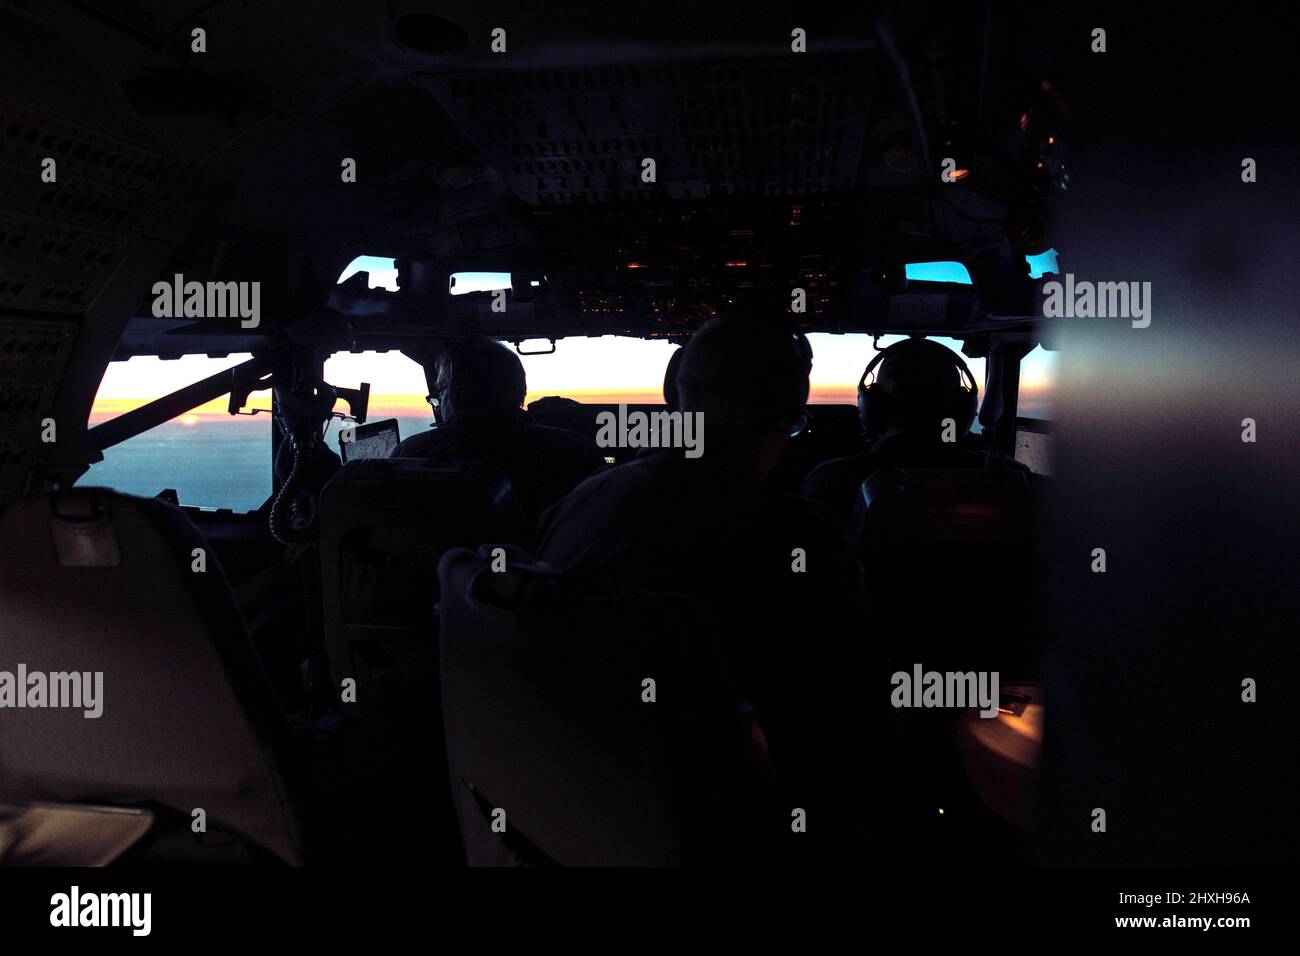 A cockpit sunset view from a NATO Boeing 707 E-3A AWACS. These aircraft are patrolling Allied airspace in Eastern Europe, in the wake of Russia’s attack on Ukraine. NATO’s Boeing E-3A Airborne Warning & Control System aircraft has a distinctive radar dome mounted on the fuselage which allows the crew to survey an area of more than 310,798 square kilometres, or about the size of Poland. (NATO Photo) Stock Photo